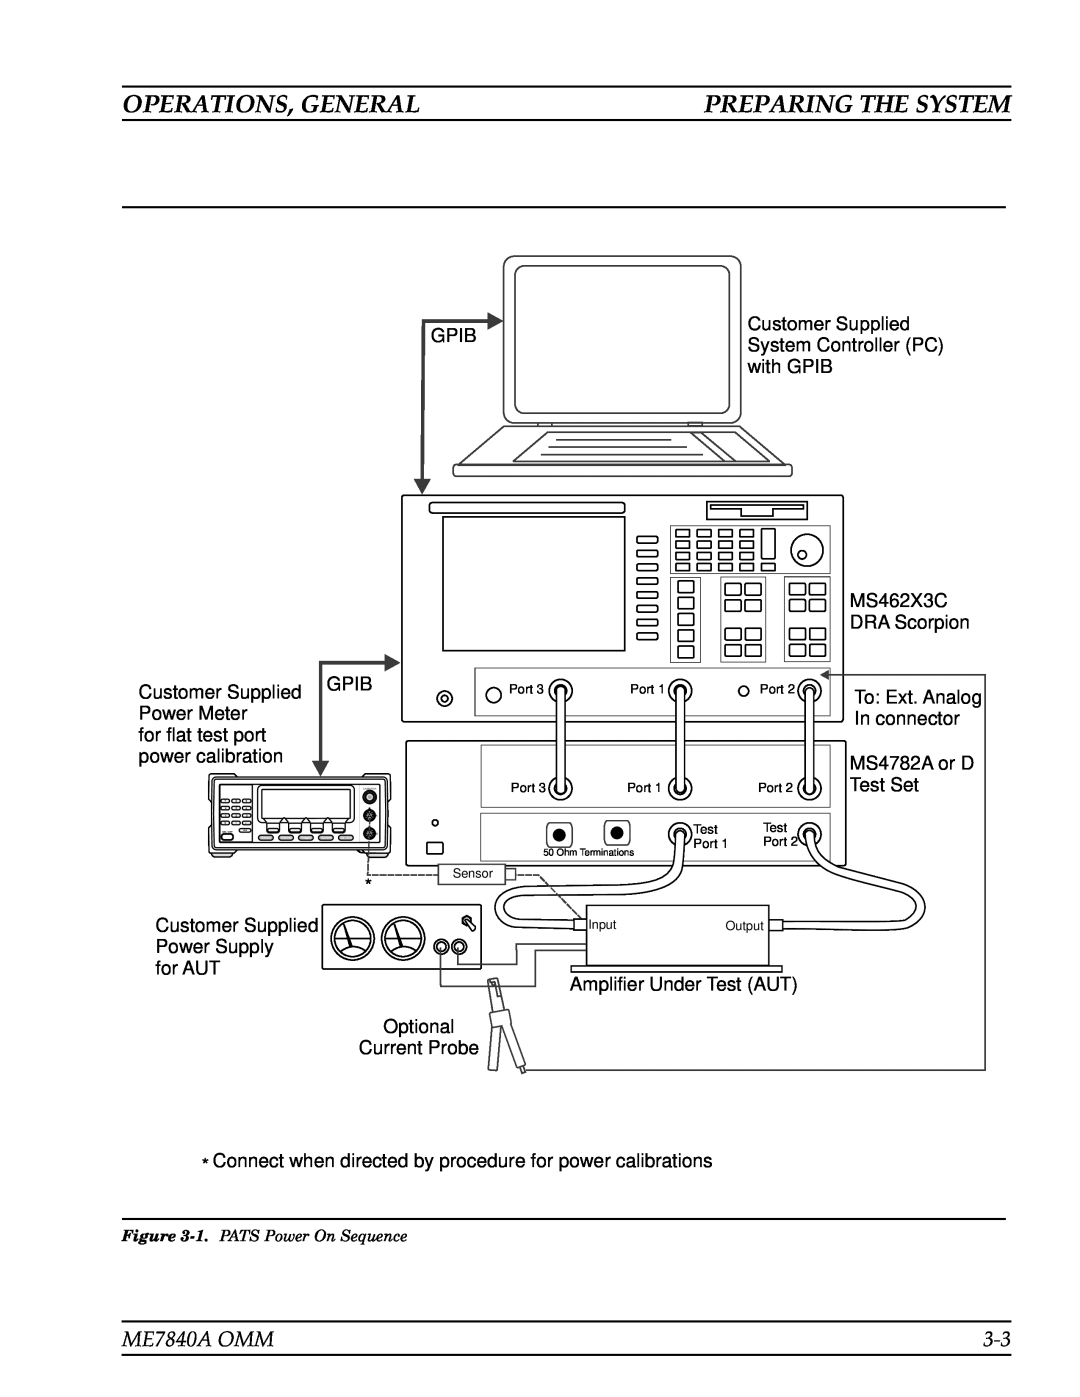 Anritsu manual Preparing The System, Operations, General, ME7840A OMM 